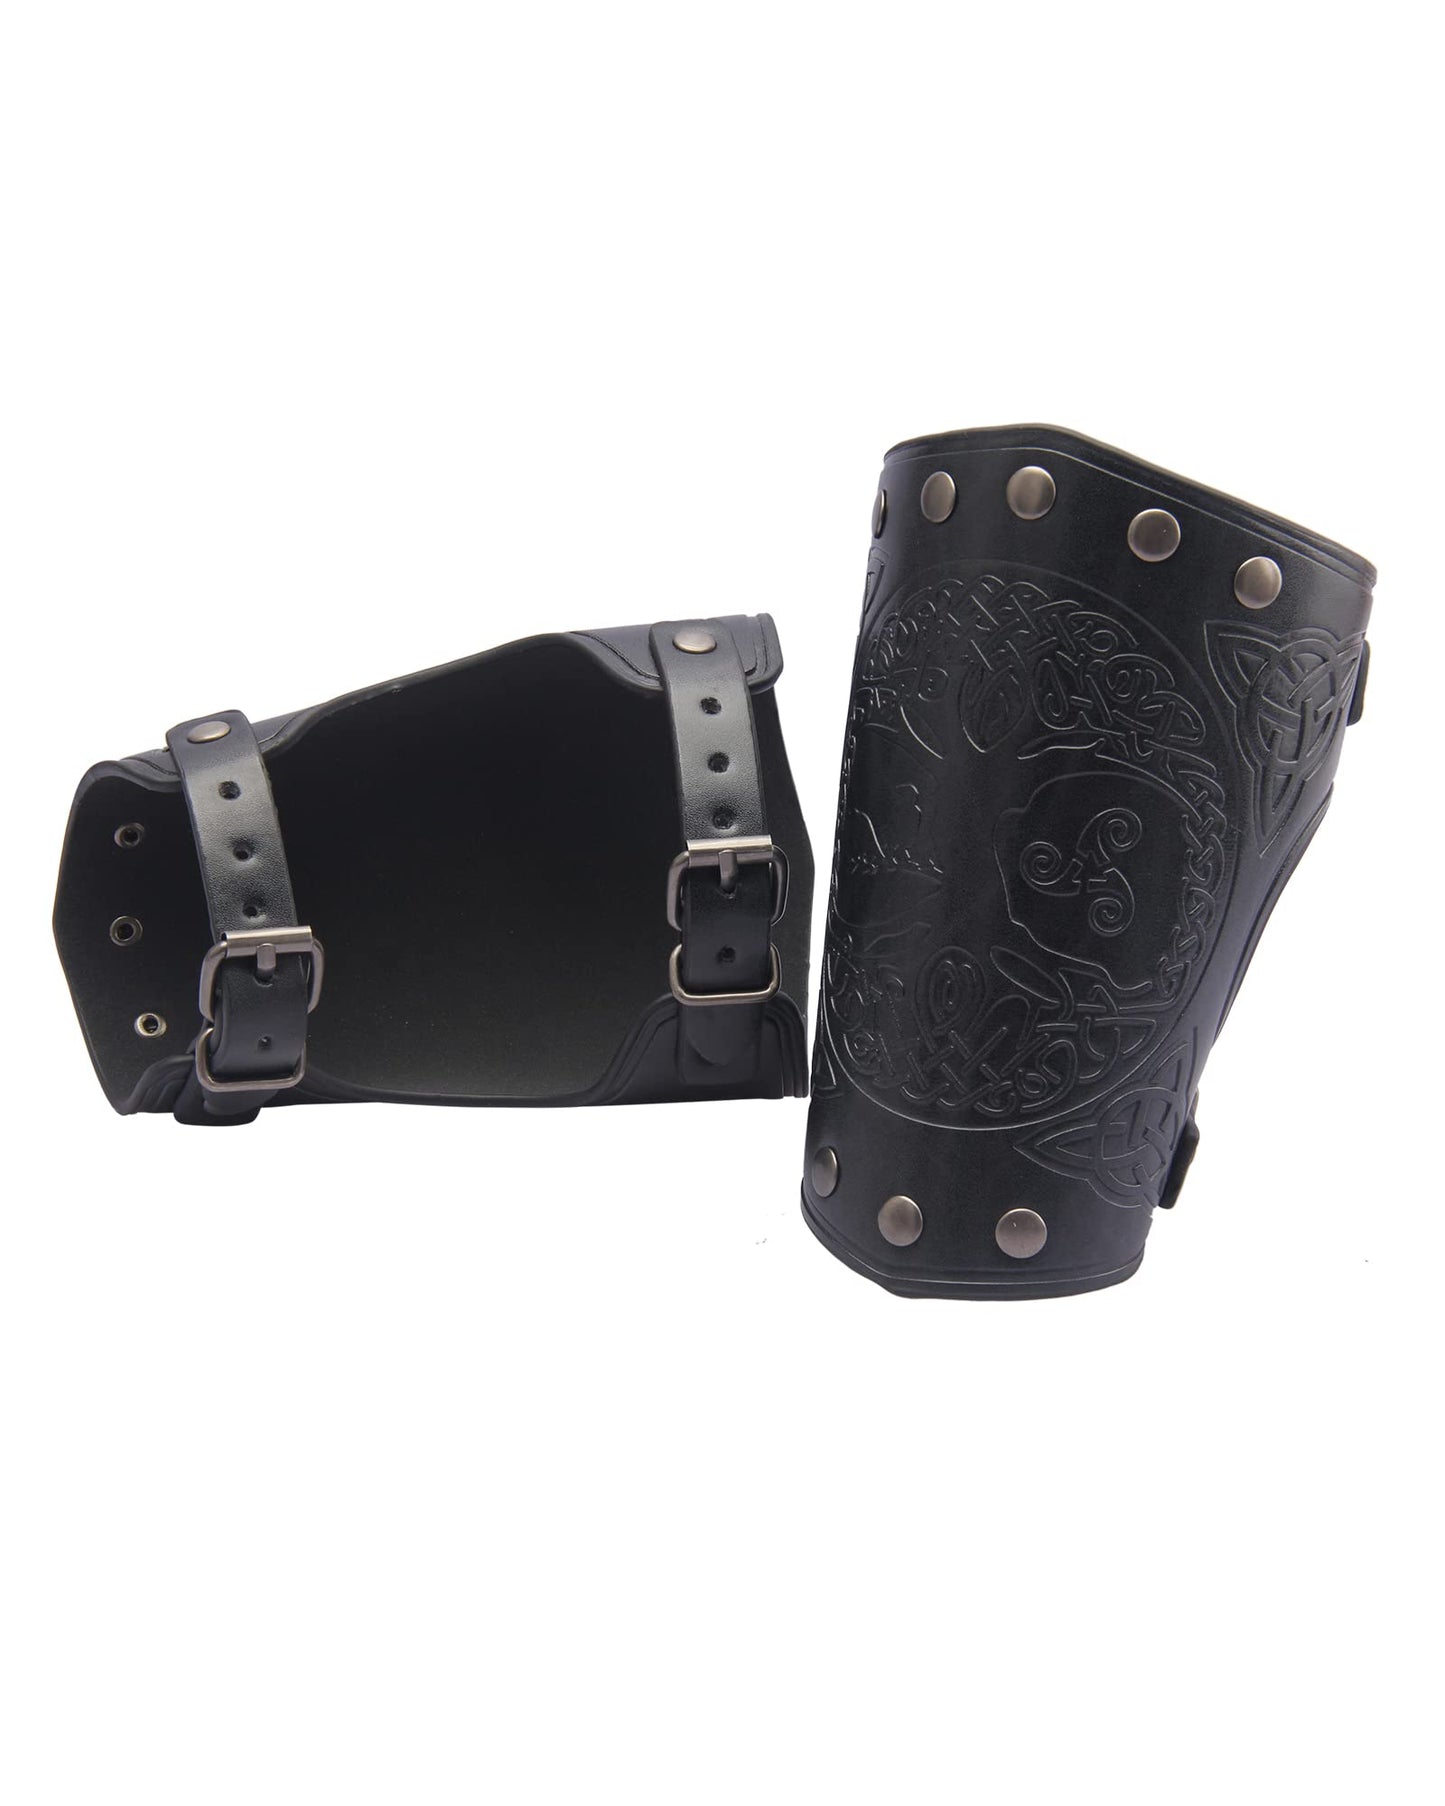 GelConnie Leather Gauntlet Wristband Viking Leather Arm Guard Medieval Armor Bracers Leather Armband Wrist Guards Cosplay Black Leather Bracers